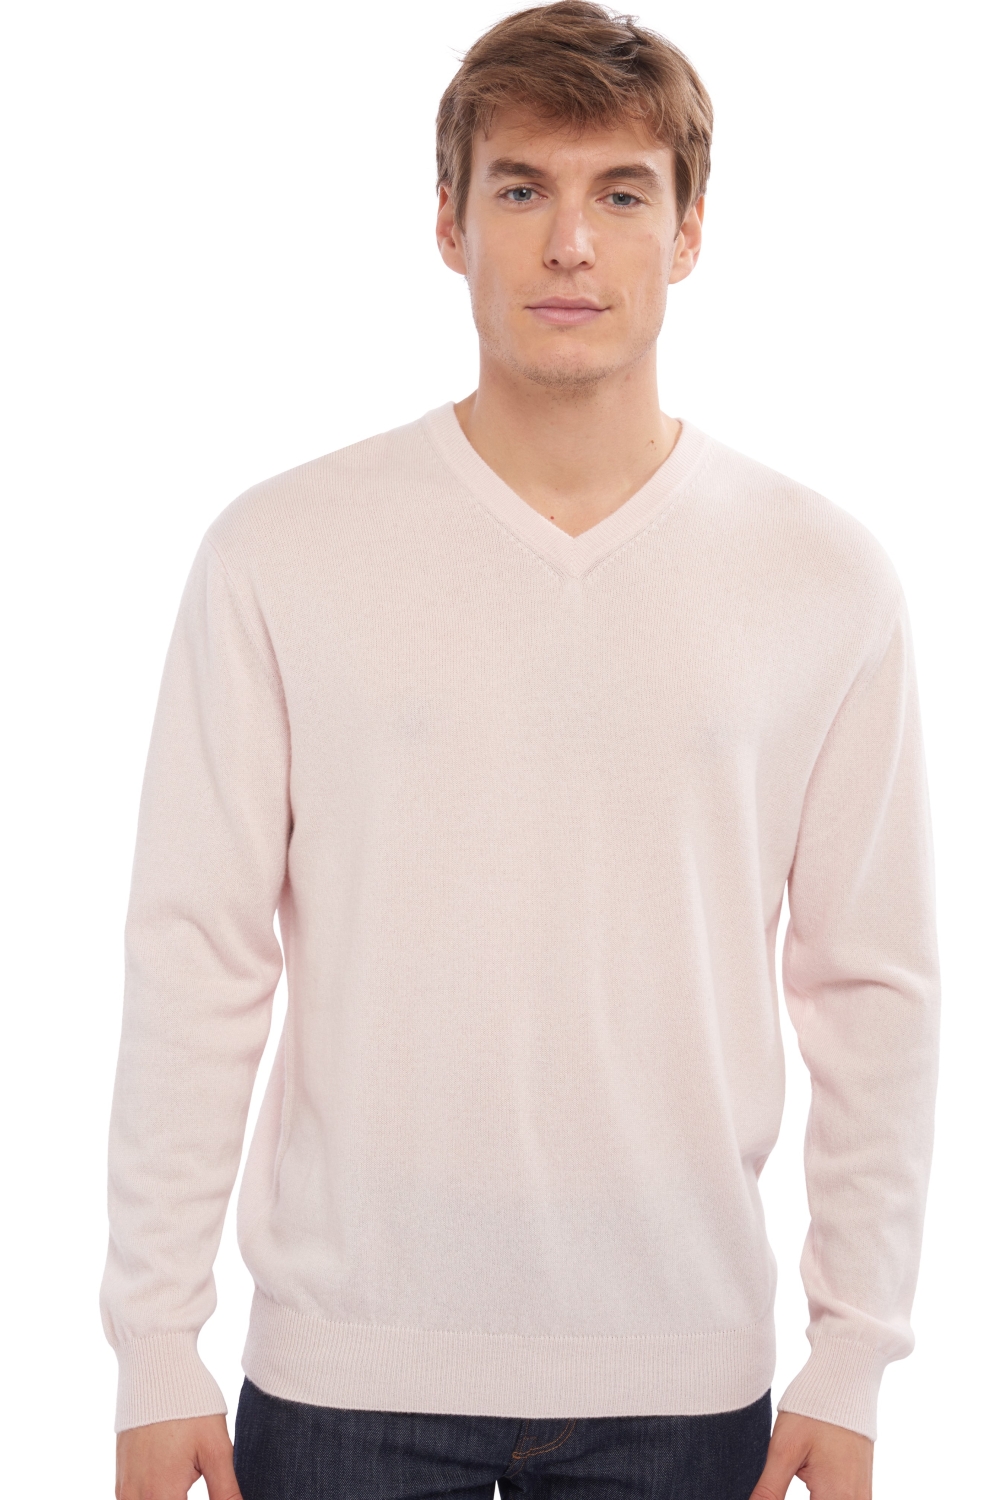 Cachemire pull homme col v gaspard rose pale 2xl